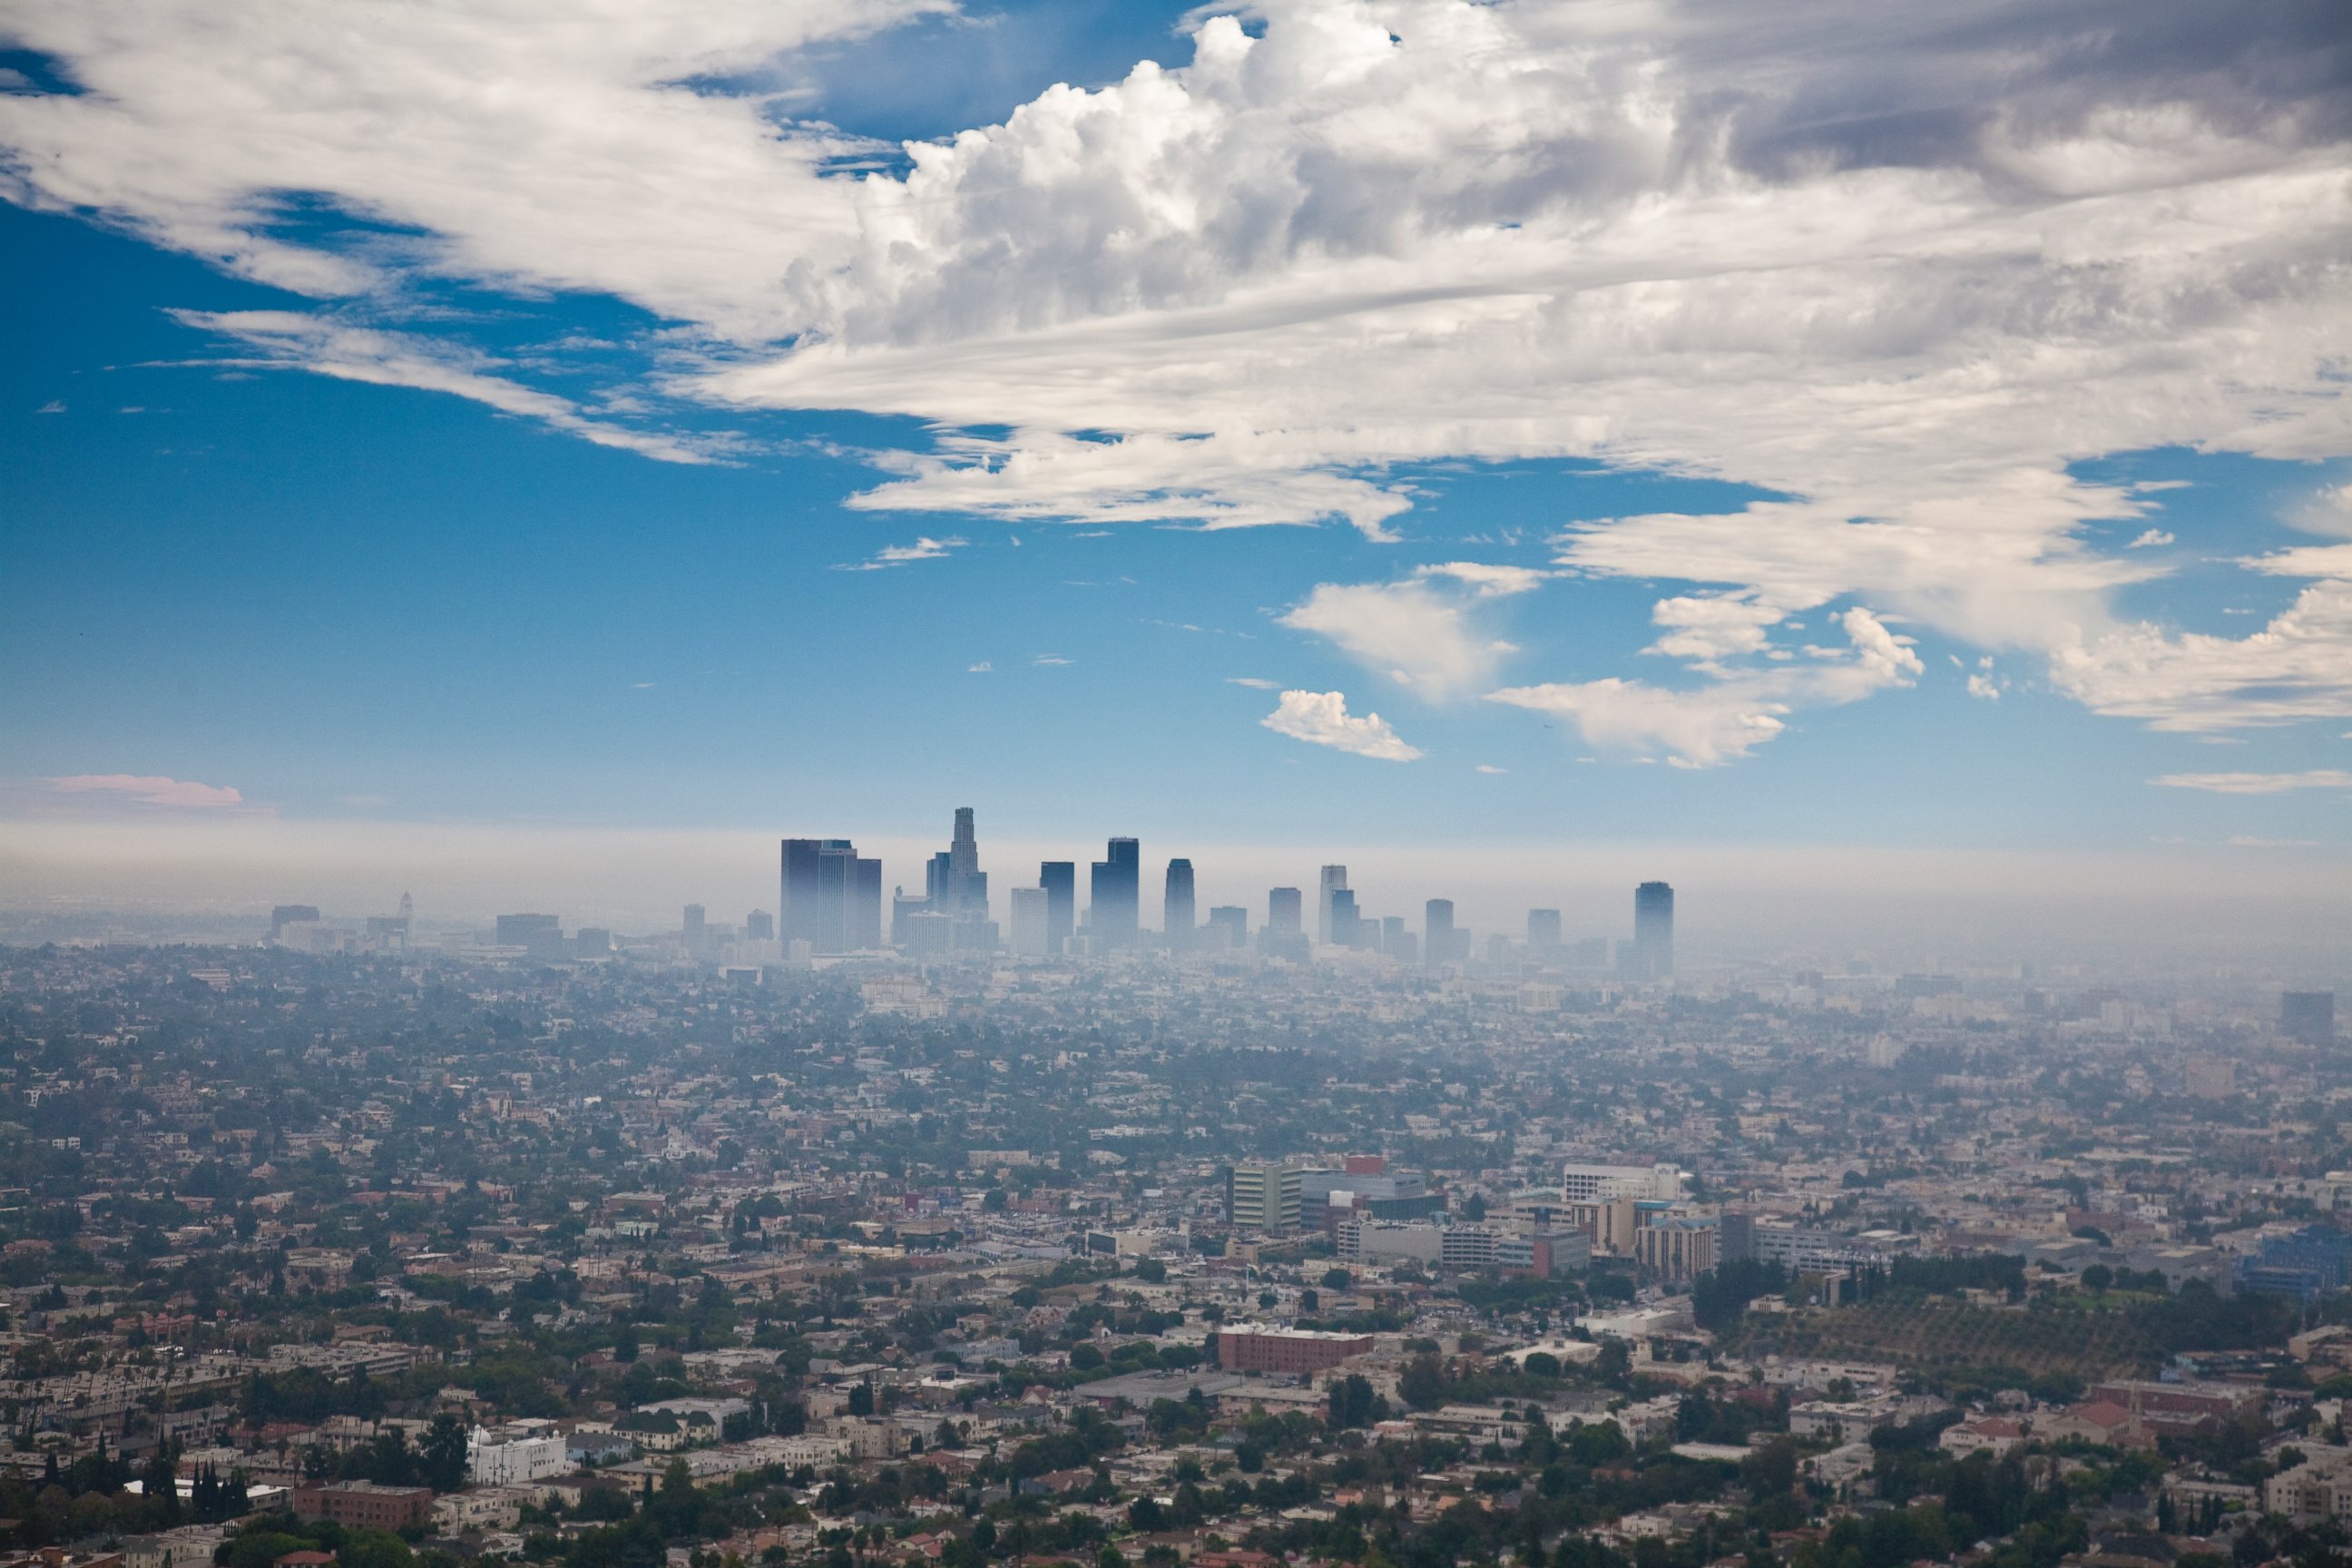 PHOTO: Smog is seen here in Los Angeles.